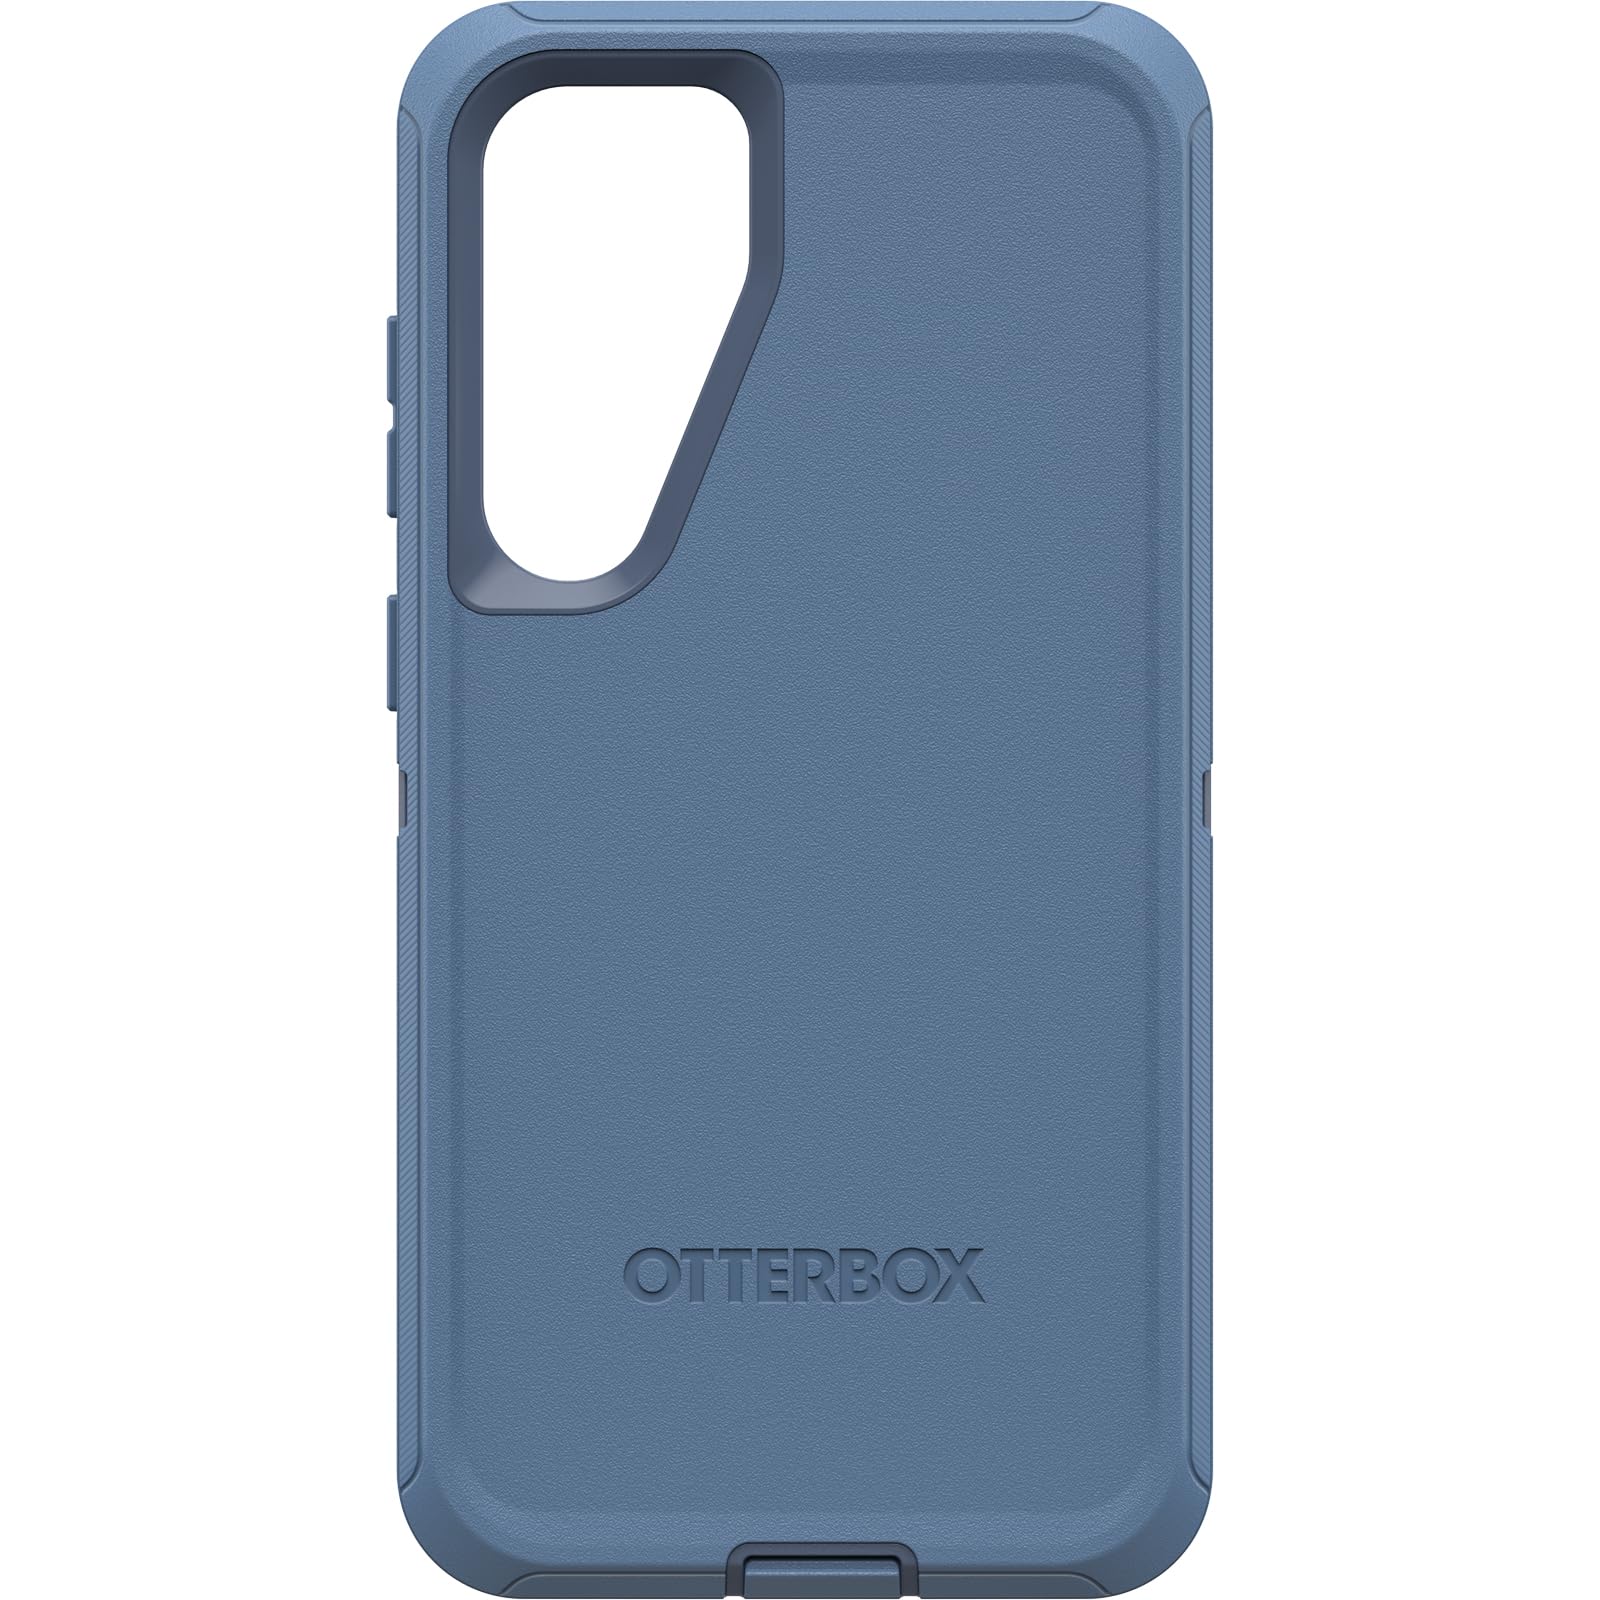 OtterBox Samsung Galaxy S24+ Defender Series Case - Baby Blue Jeans, Rugged & Durable, with Port Protection, Includes Holster Clip Kickstand